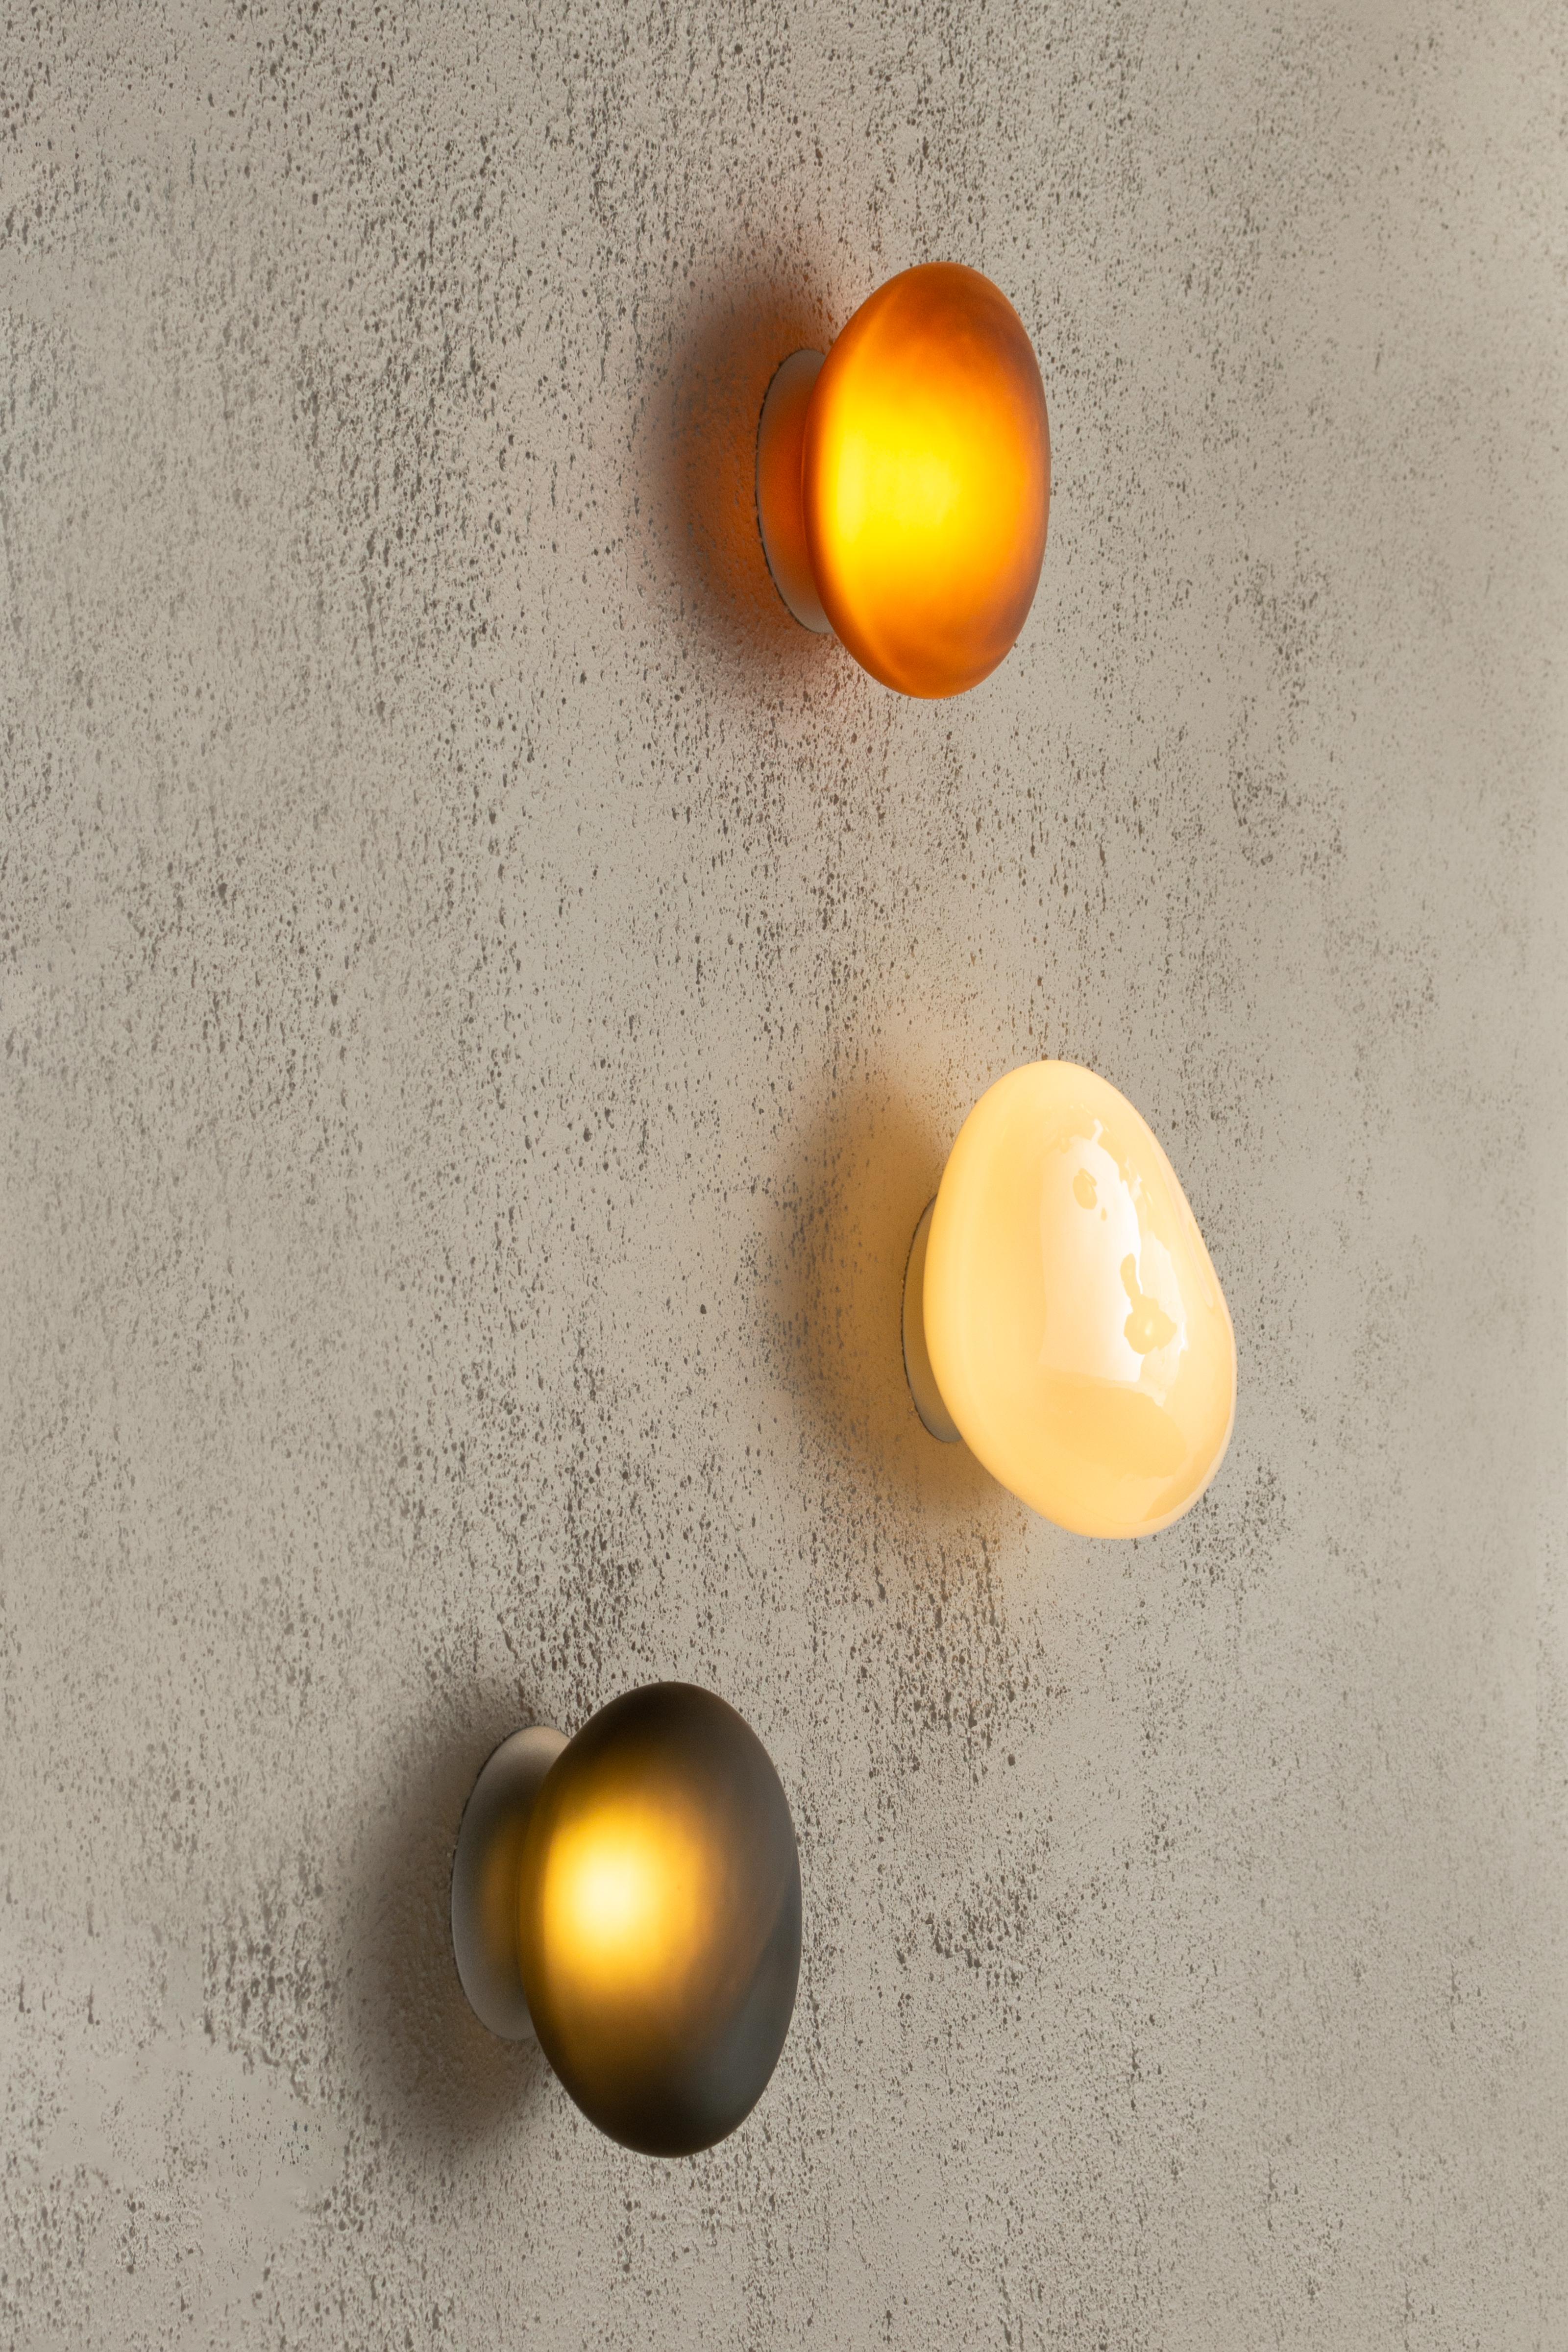 Contemporary wall lamp pebble 

Electrical : 
Voltage: 110 – 277V / 220 – 240V
Integral LED source : 1 x 9W LED

The model shown in picture:
Dimensions: B: 34.5 x 22 x 12.5 cm 
Color: Citrine
______
Pebble
The Pebble series celebrates the